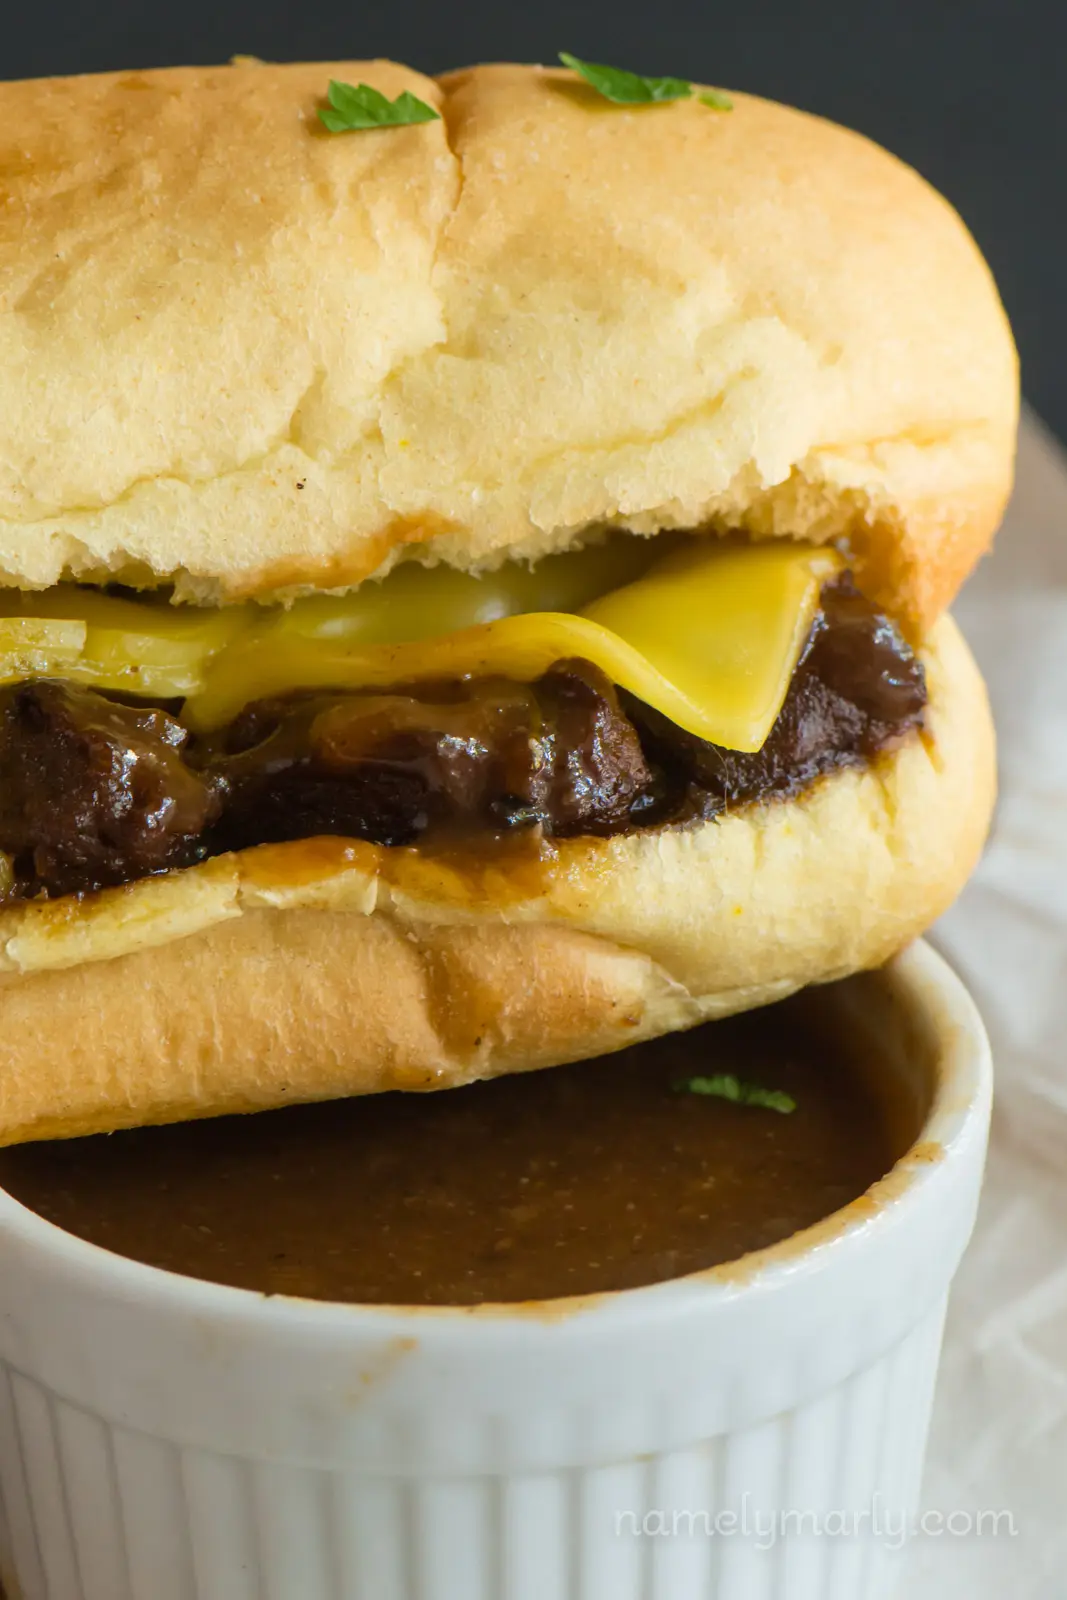 An au jus sandwich sits on a small bowl of gravy.